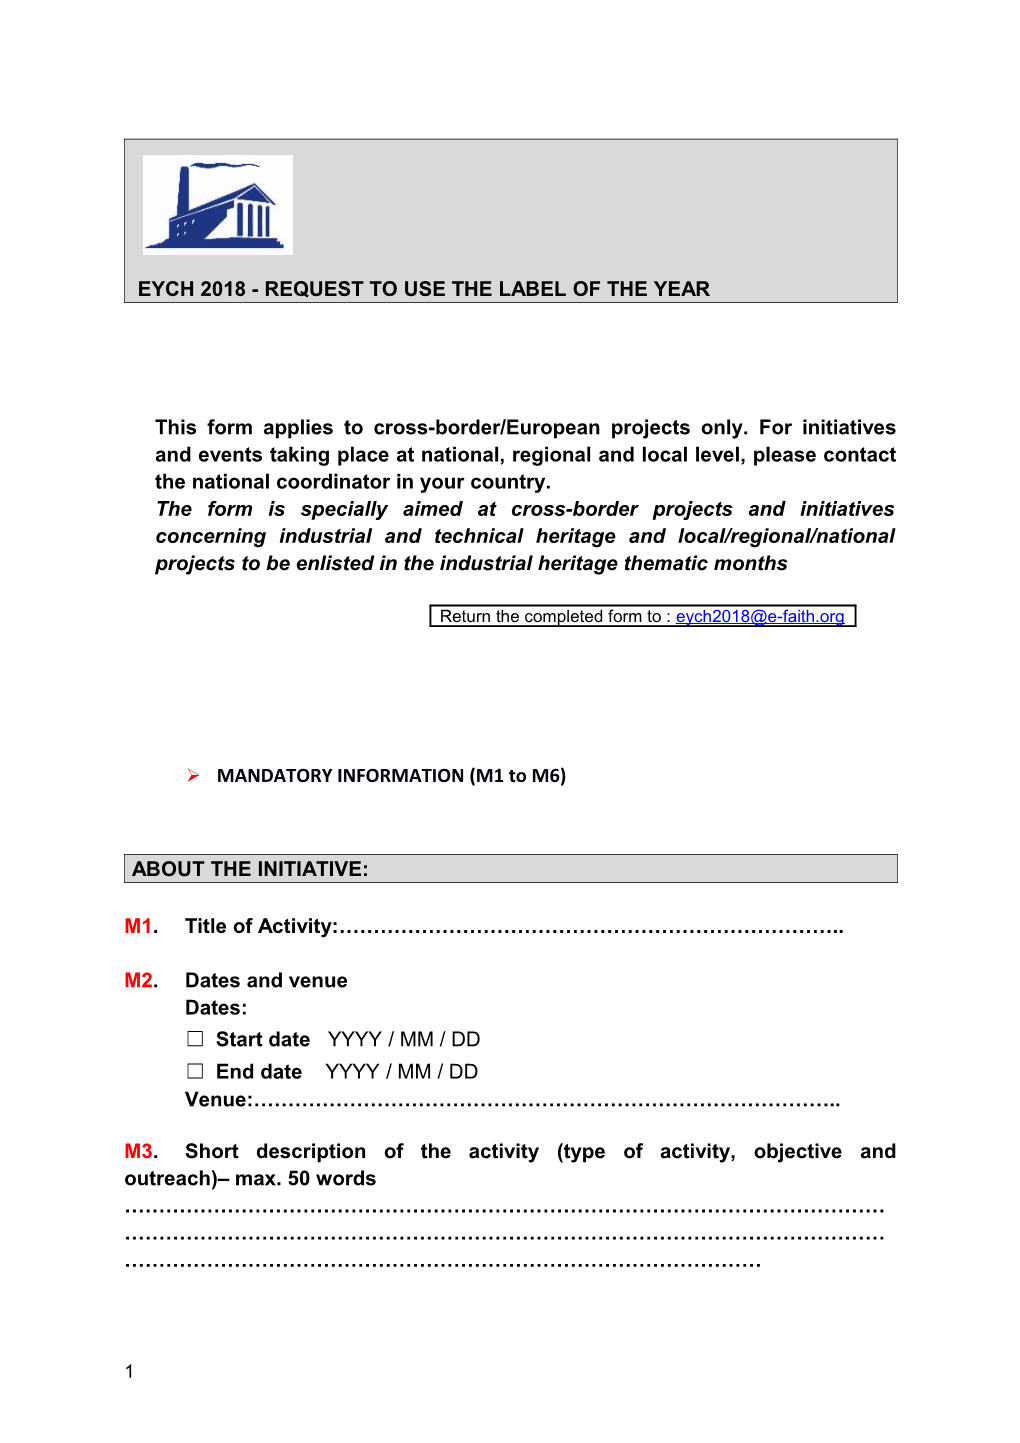 Eych 2018 - Request to Use the Label of the Year